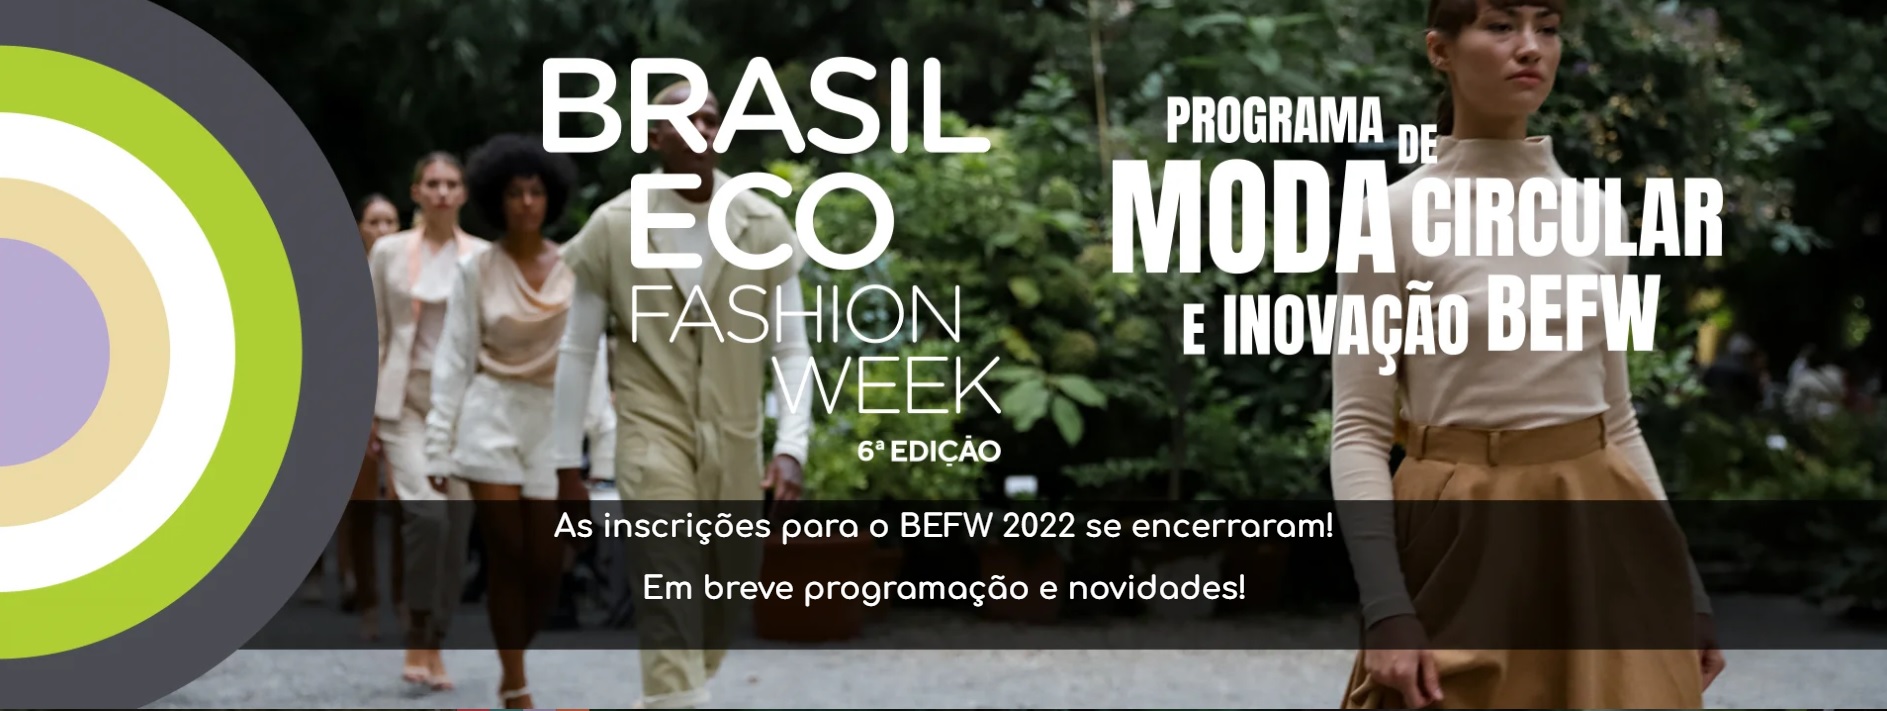 Hope releases a clothing line-up with biodegradable fabric - Texbrasil